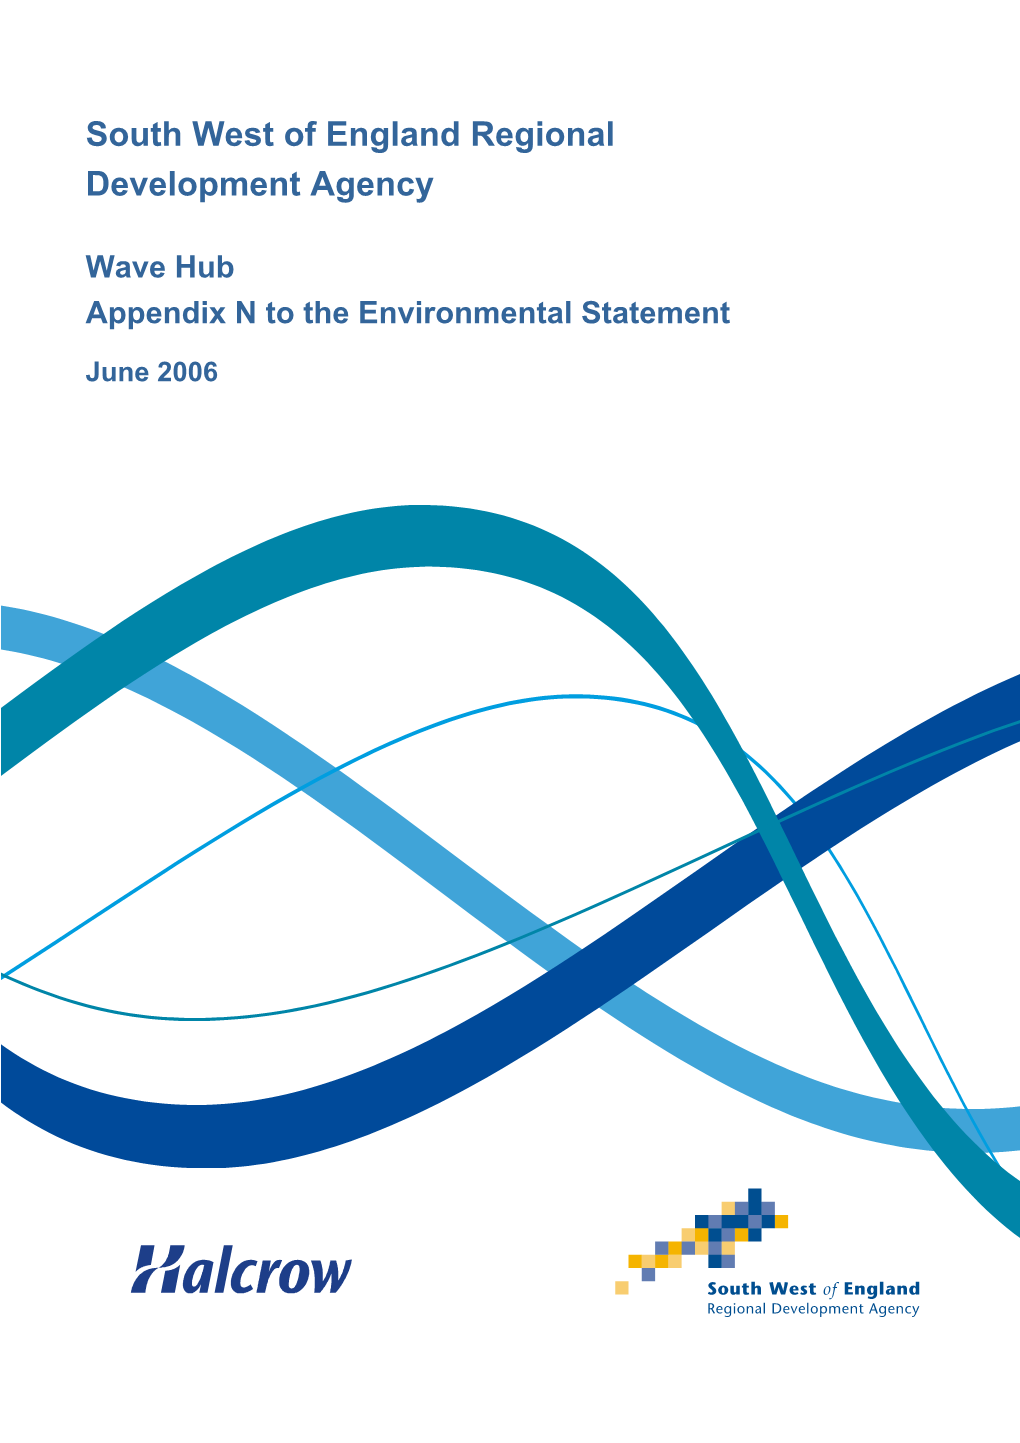 Wave Hub Appendix N to the Environmental Statement